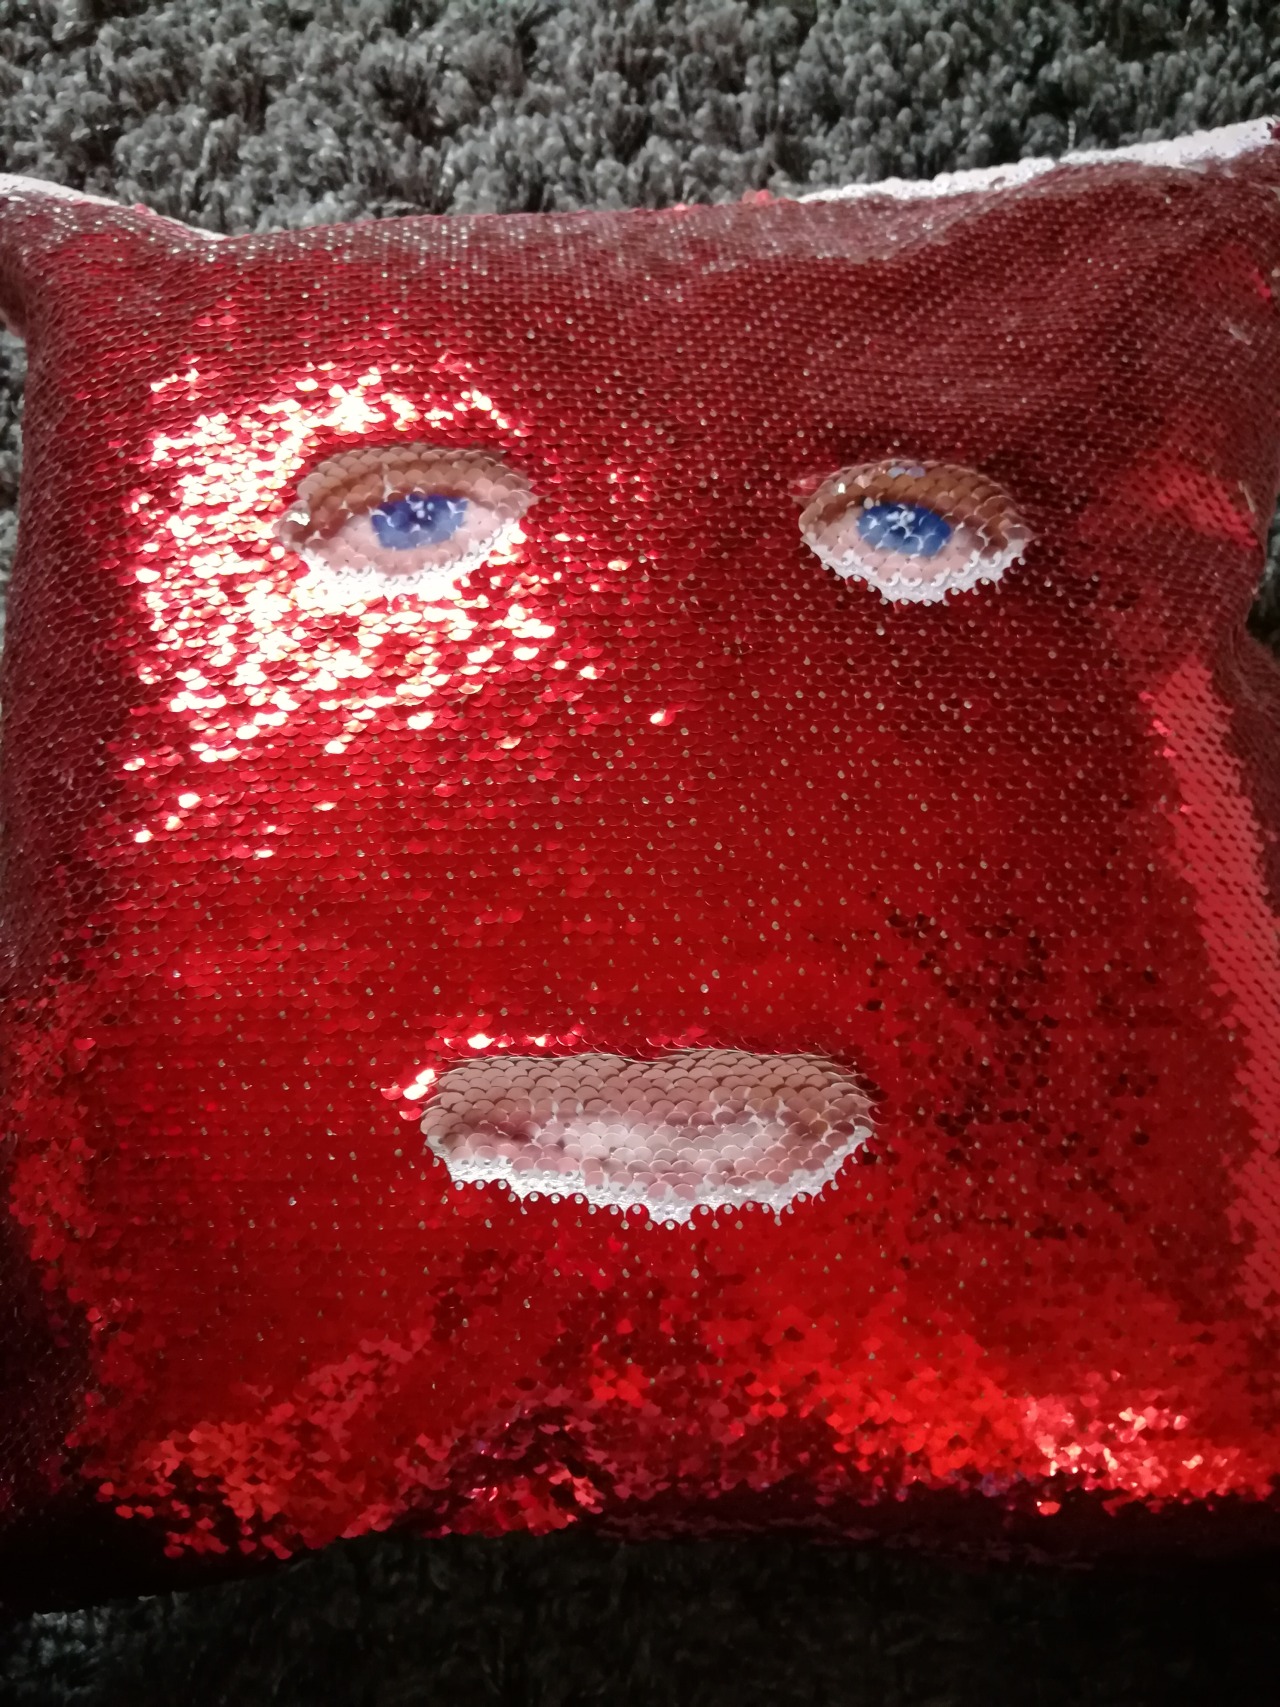 sequin pillow with face